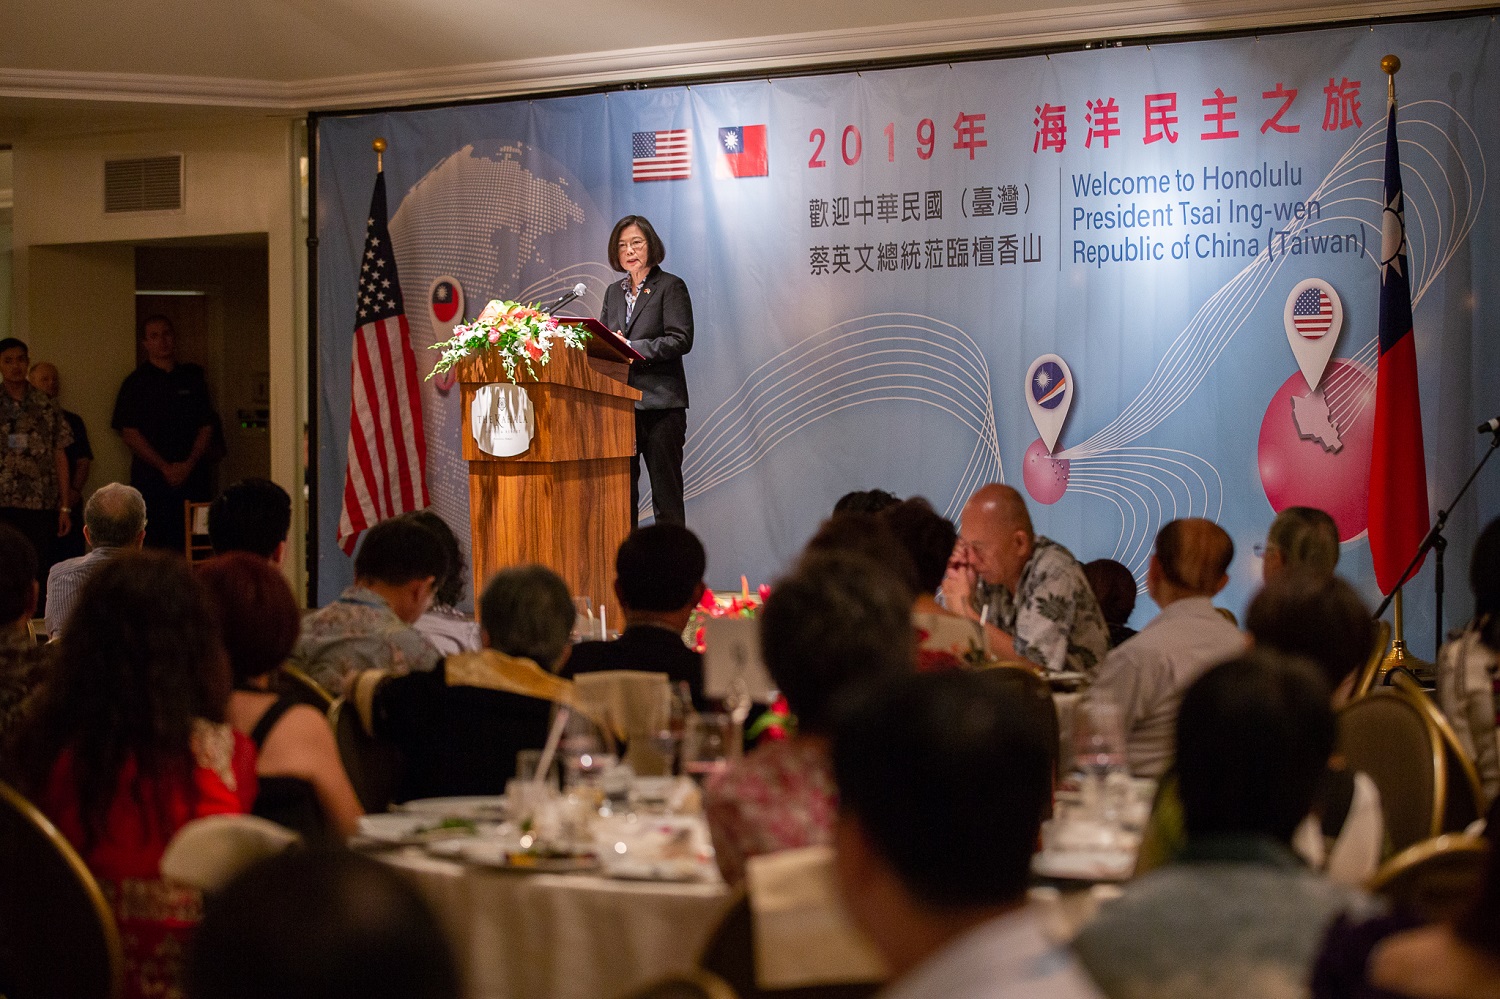 President Tsai attends dinner banquet with Taiwanese expatriates in Honolulu